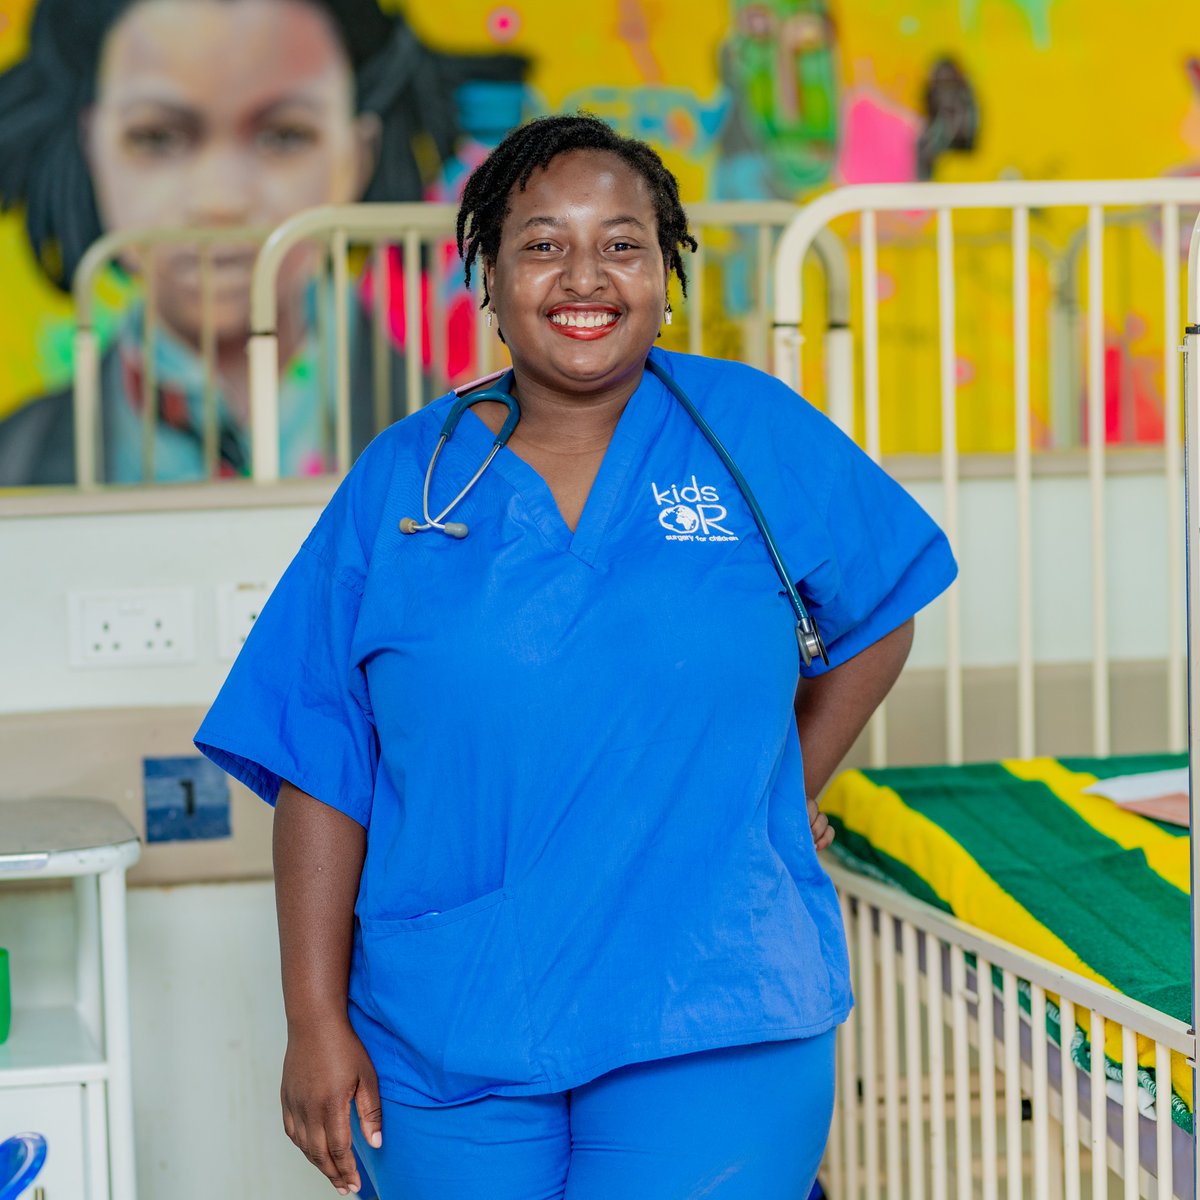 Big shout-out to Dr. Florence. 👏 The KidsOR/@Smiletrain scholar has been working hard training to be a paediatric surgeon 😅 🇲🇼 Based in Malawi, Dr. Florence is leading on cases herself & told us about an operation she performed on a boy, 13, letting him to return to school 👏